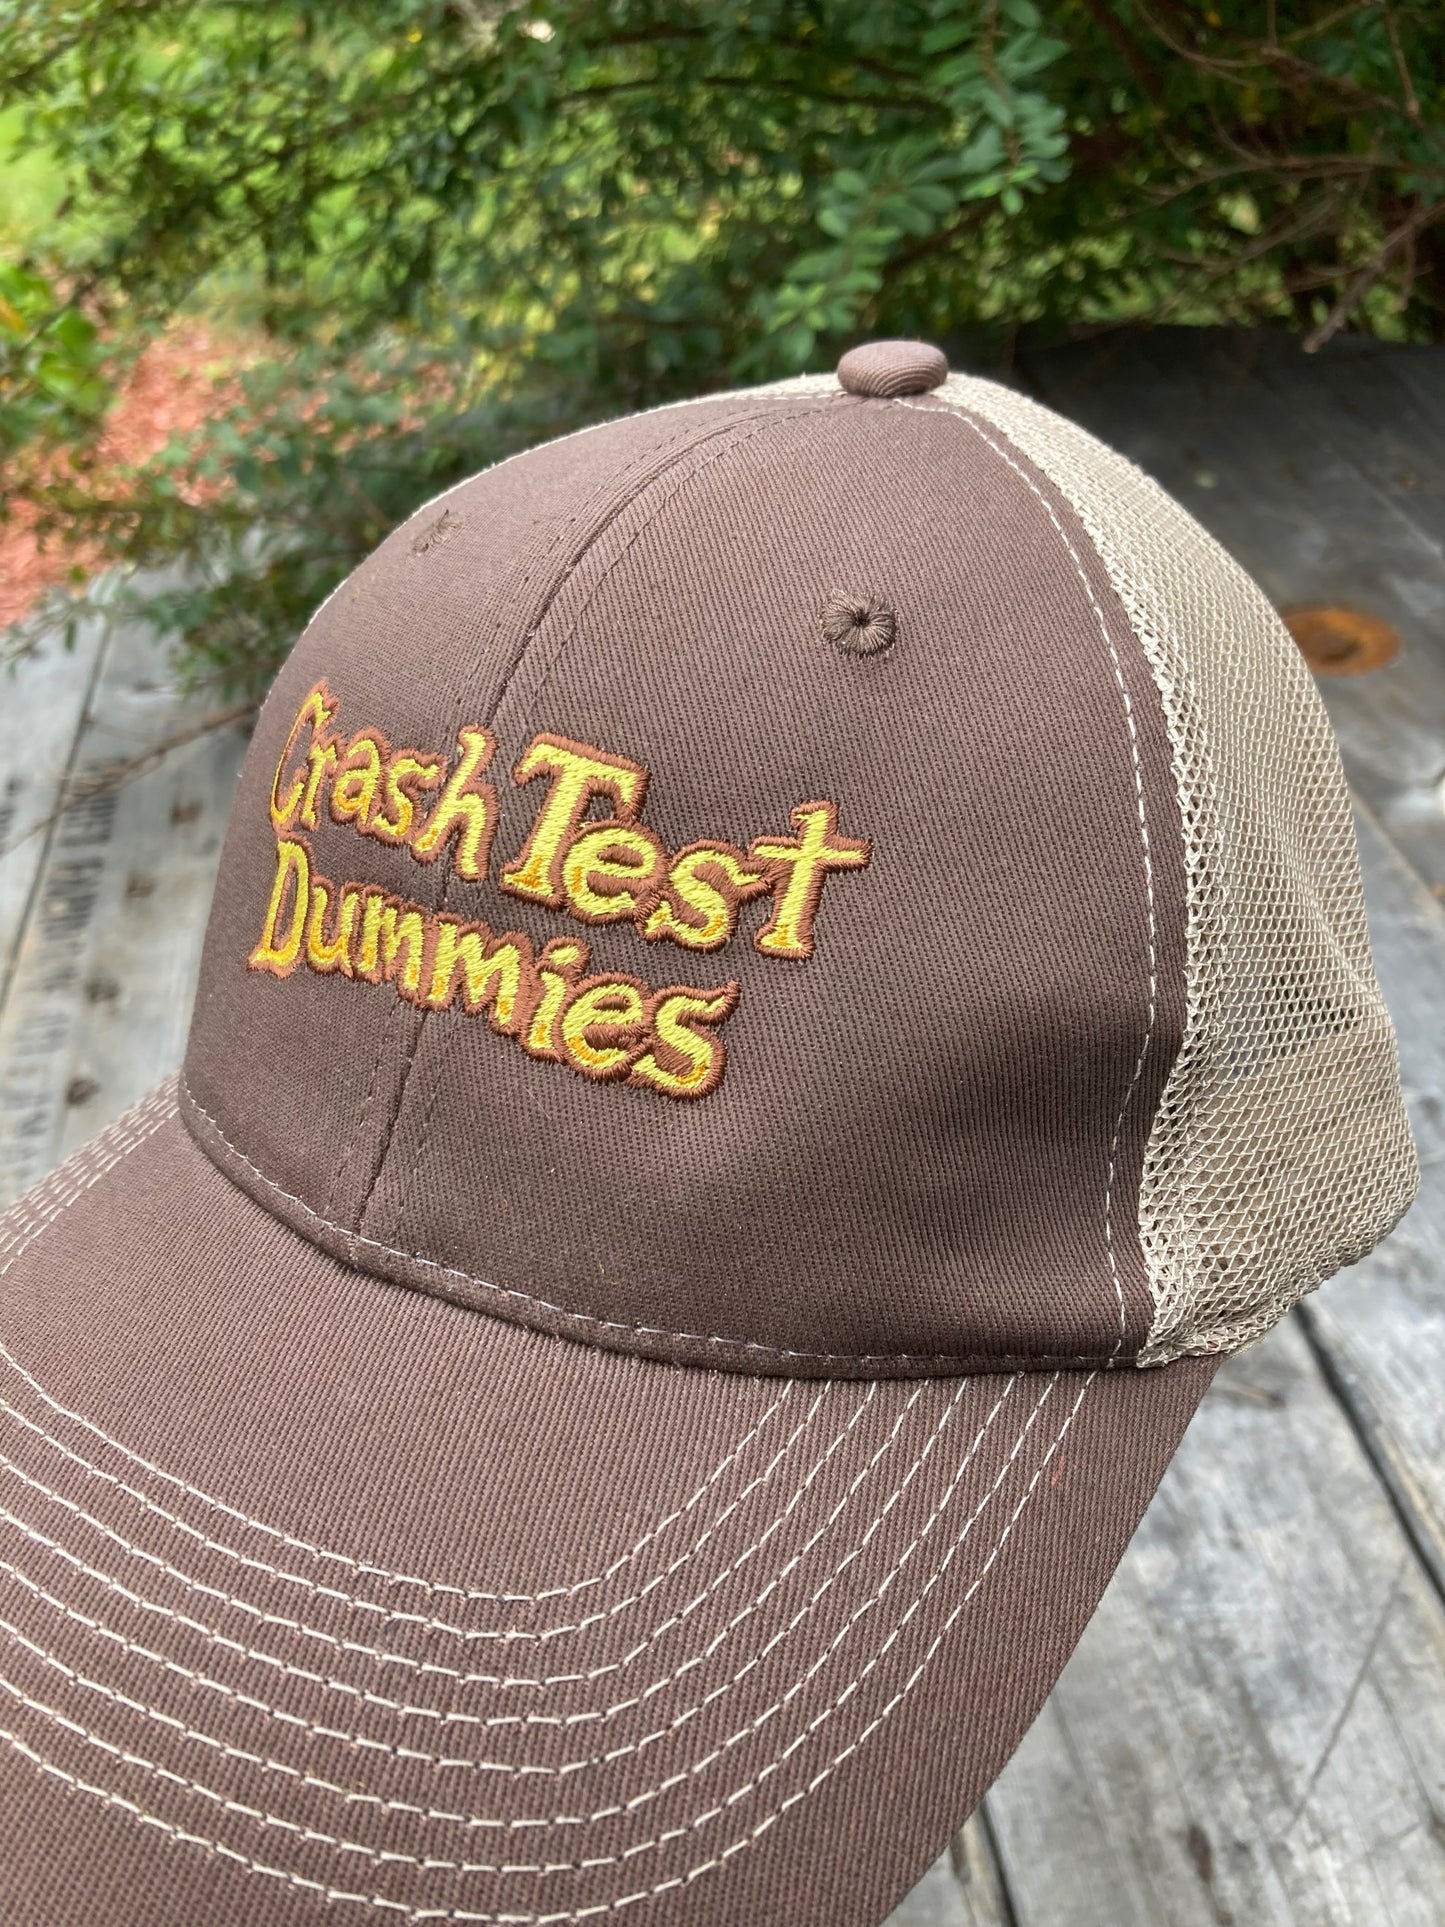 Embroidered Retro Trucker Hat Mesh Back (Coffee)